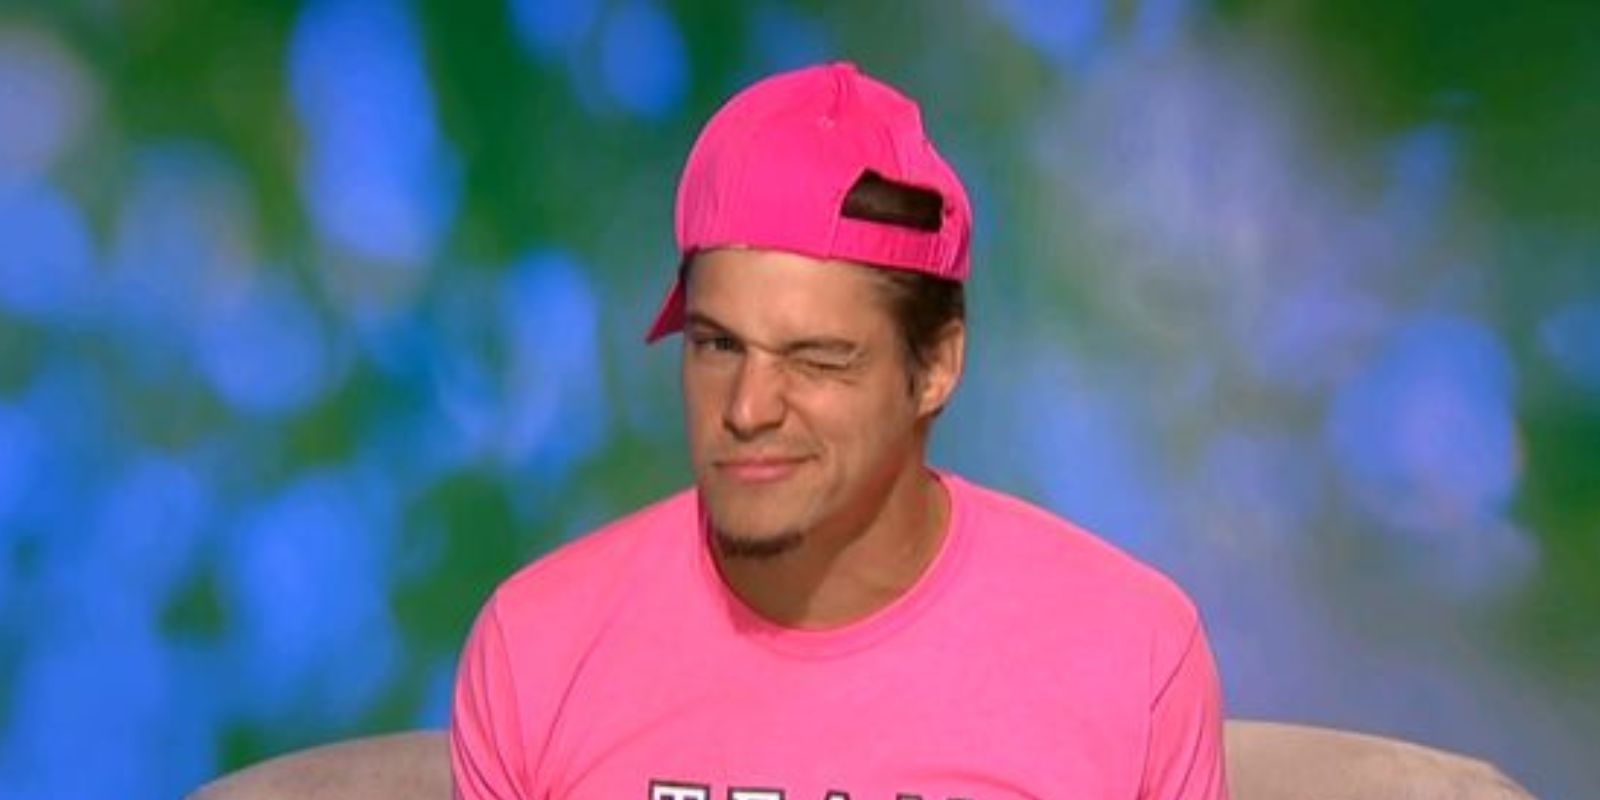 Zach wearing pink and winking in diary room